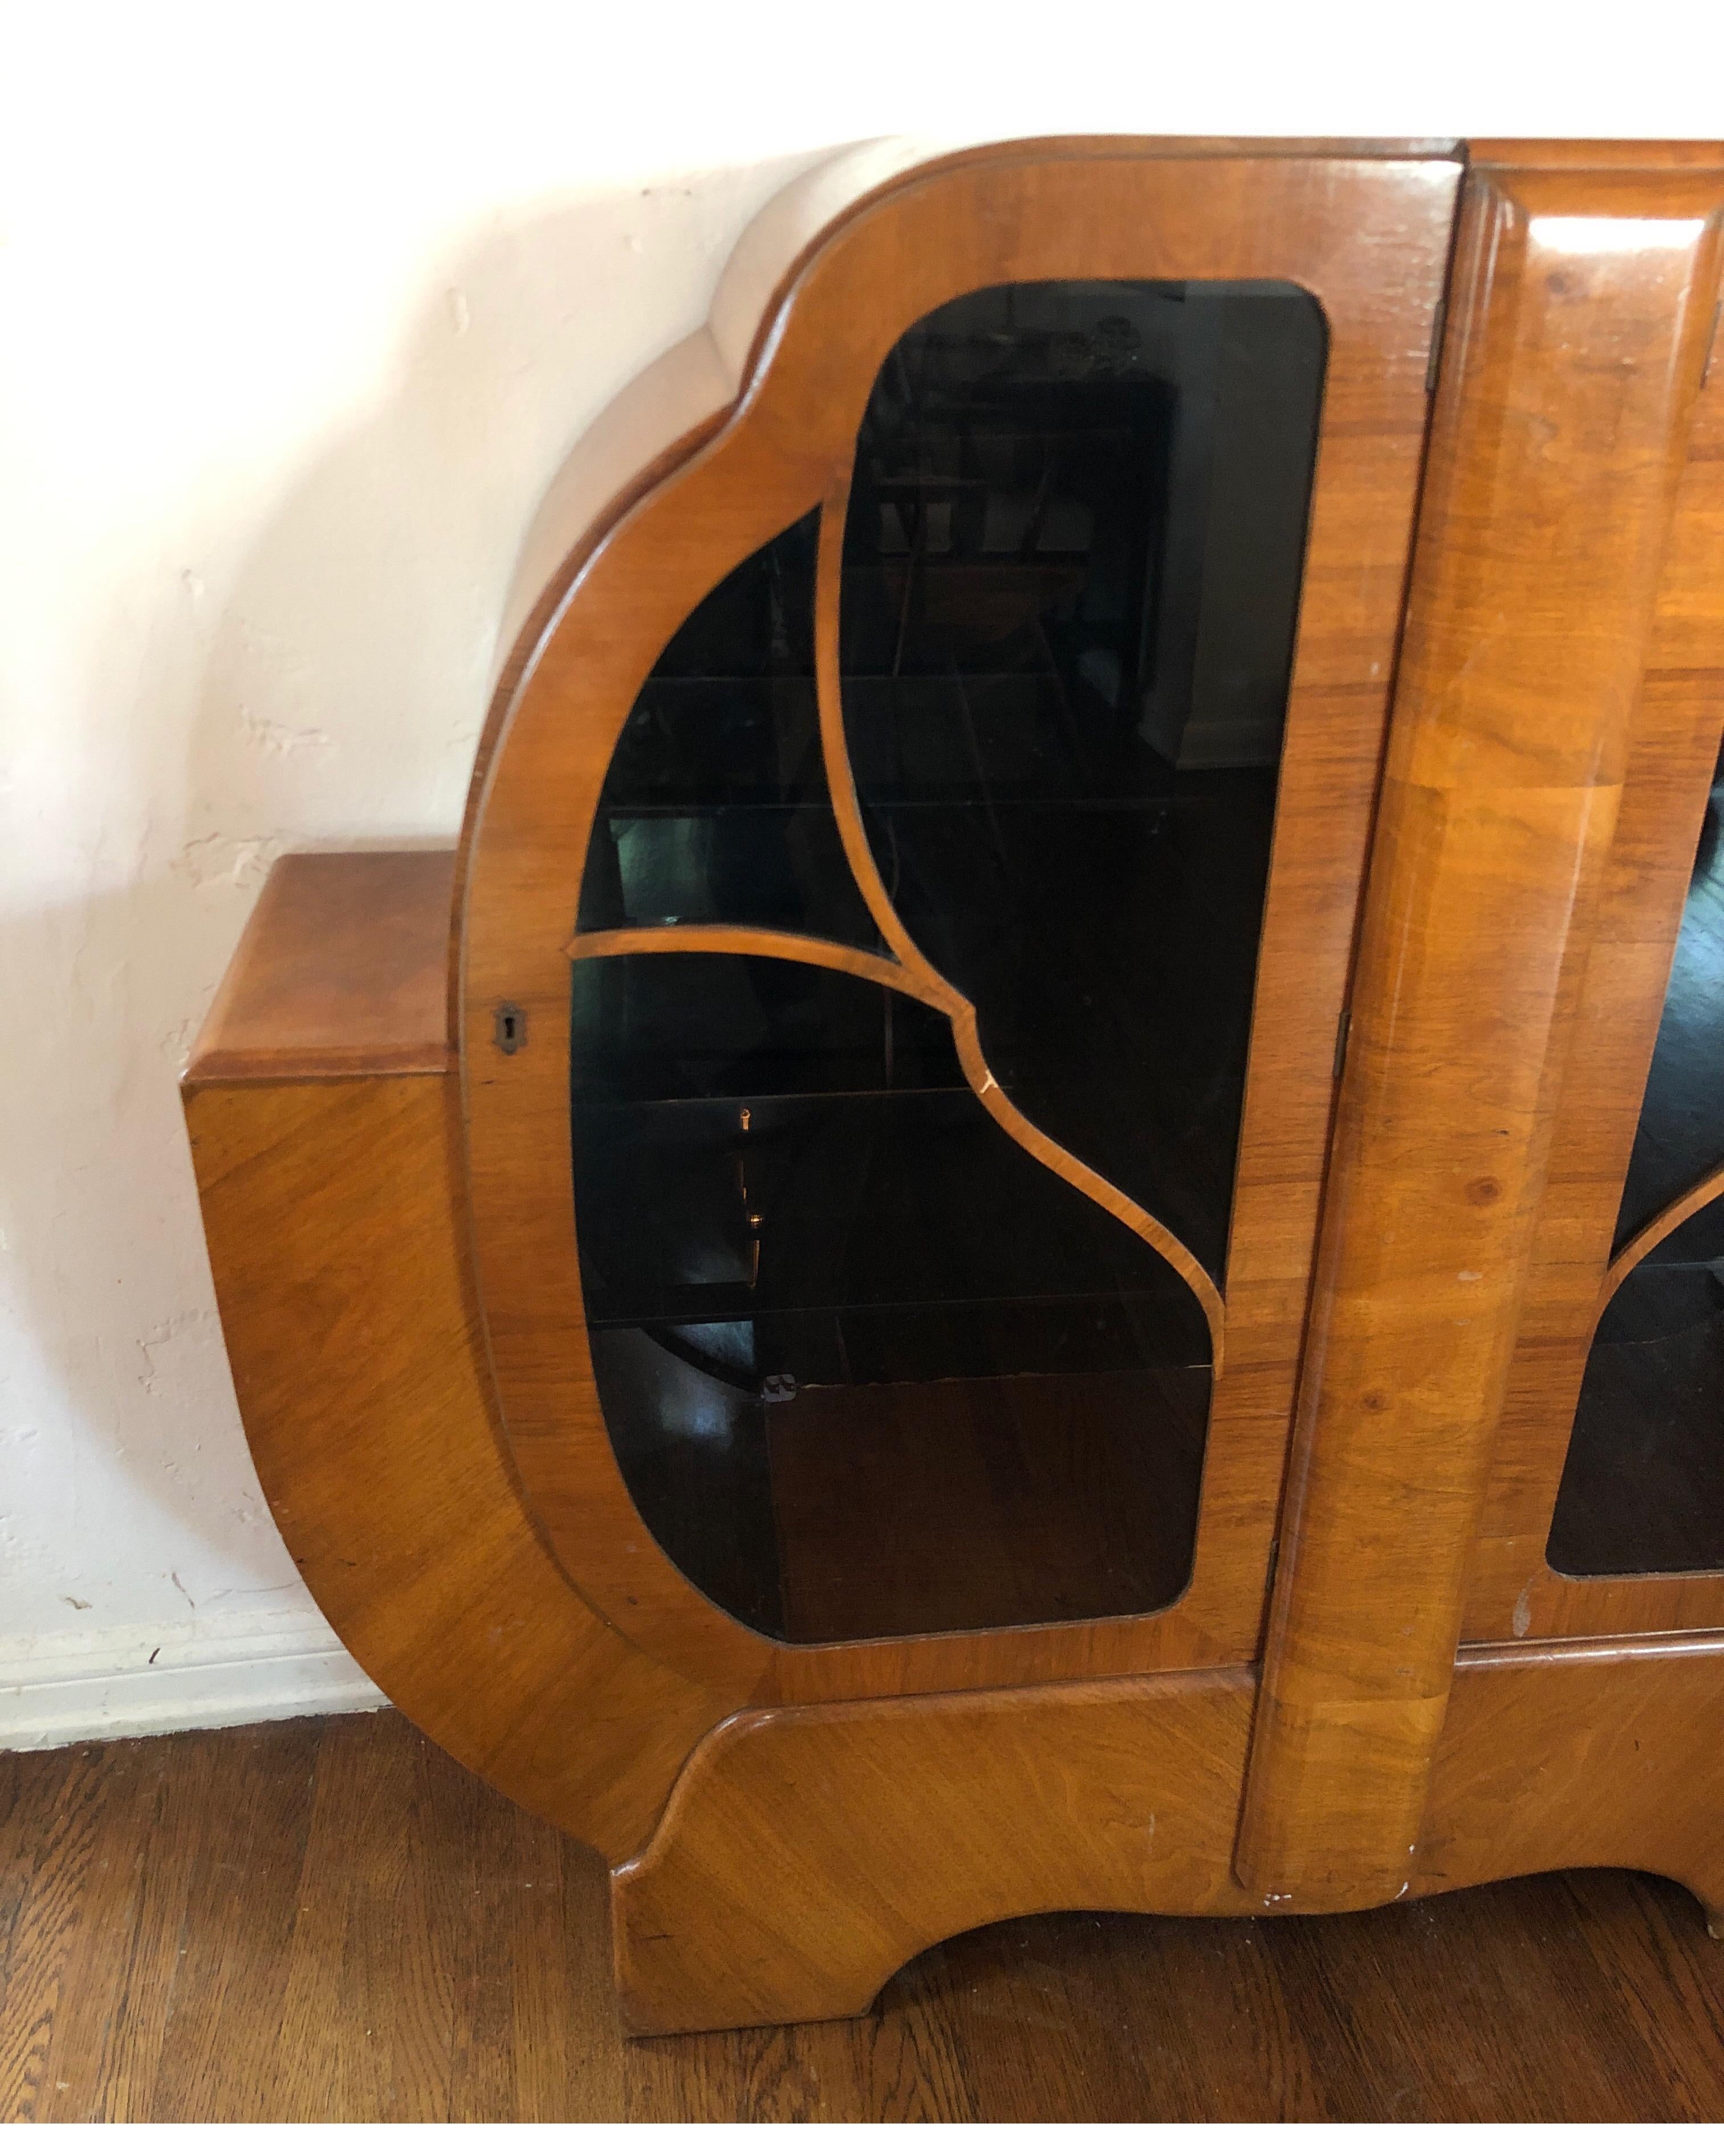 Art Deco dry bar in walnut with glass doors. Two glass shelves inside. 
Back is a black fiberglass with a crack that was repaired. 

Overall good condition with minor wear consistent with age.